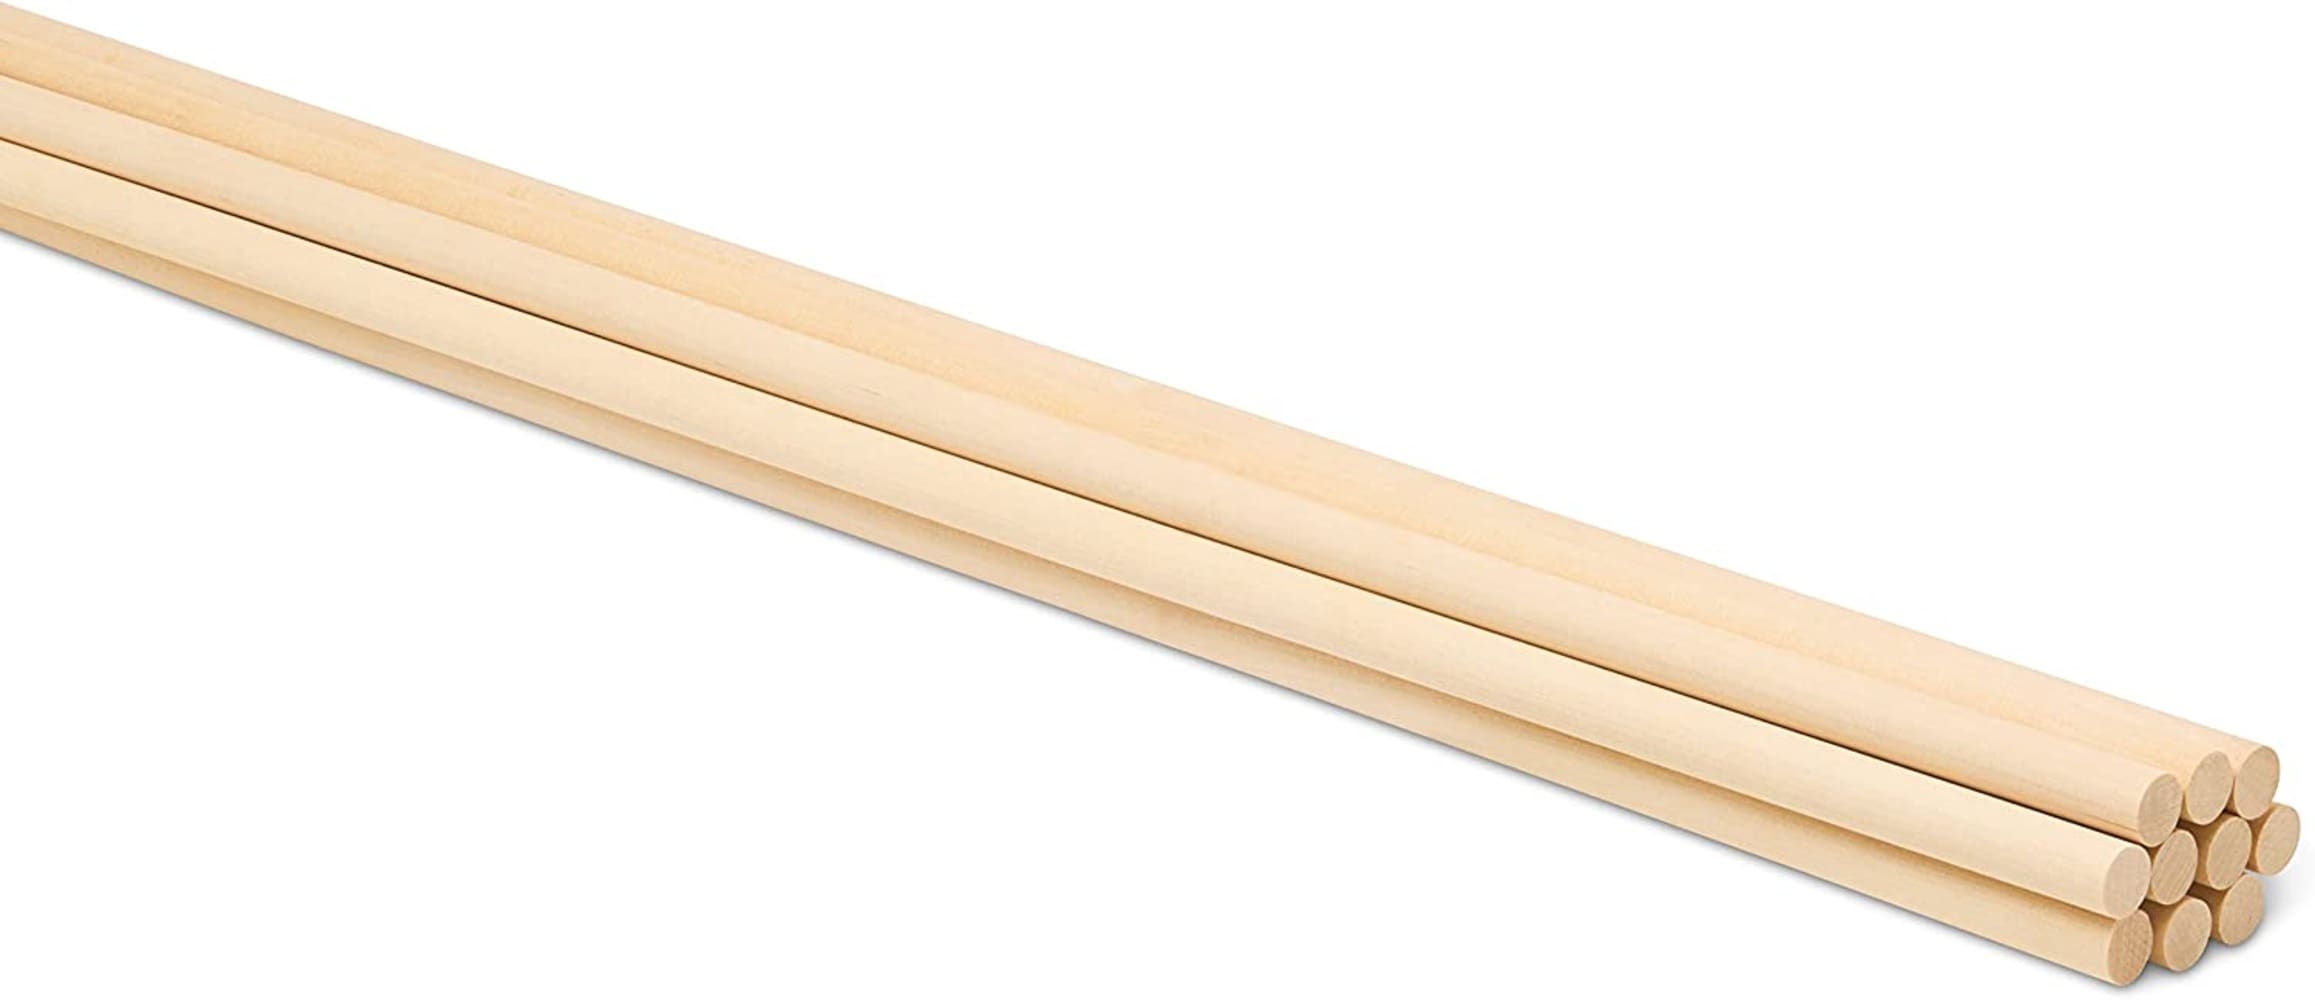 Dowel Rods Wood Sticks Wooden Dowel Rods - 3/8 x 12 Inch Unfinished  Hardwood Sticks - for Crafts and DIYers - 50 Pieces by Woodpeckers